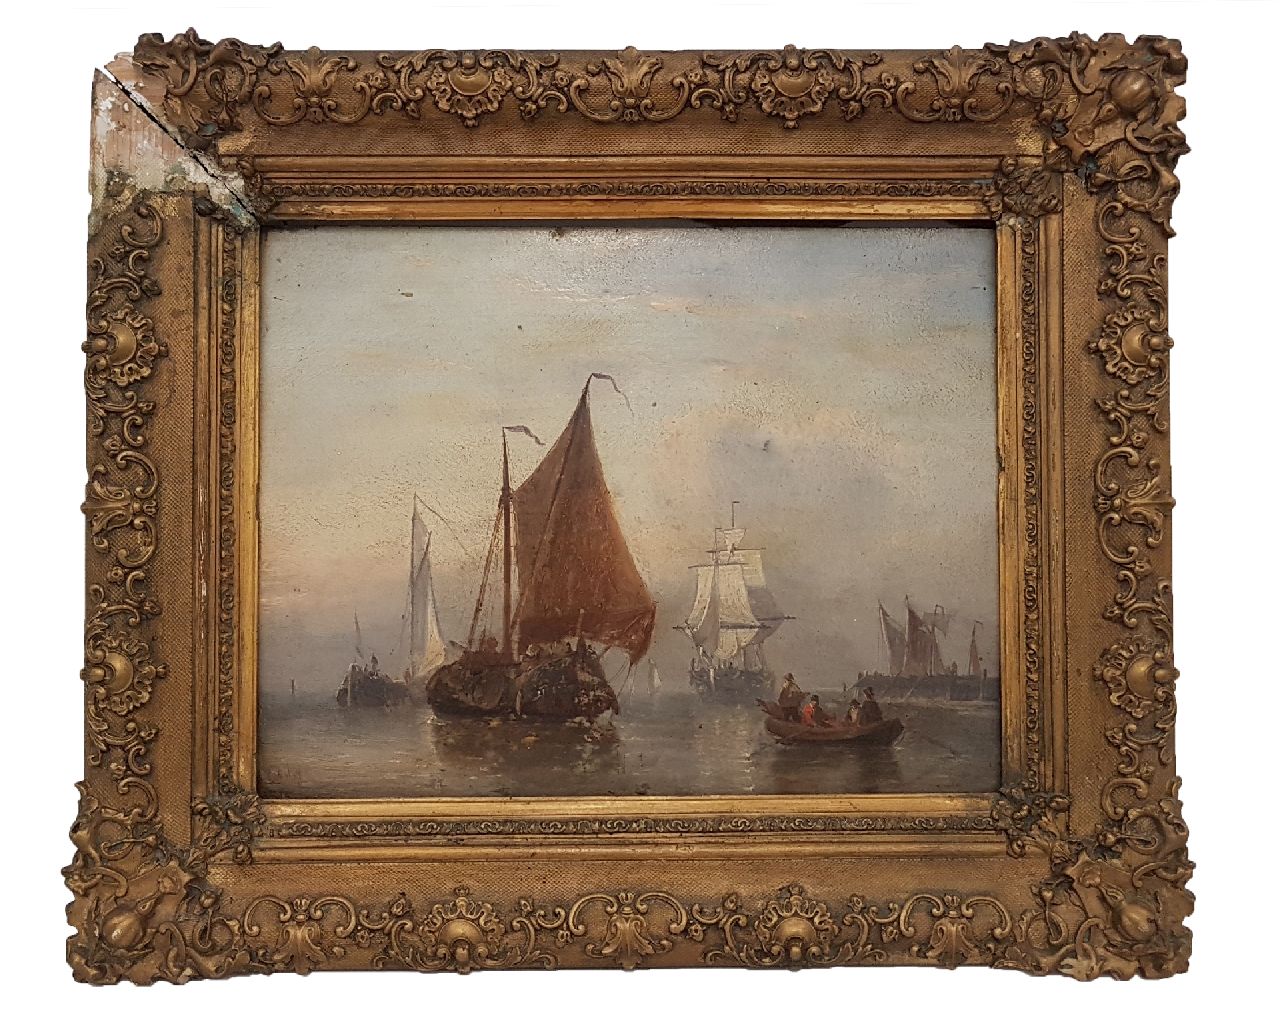 Opdenhoff G.W.  | Witzel 'George Willem' Opdenhoff, Shipping in a calm near a harbour, oil on panel 27.9 x 36.2 cm, signed l.l.